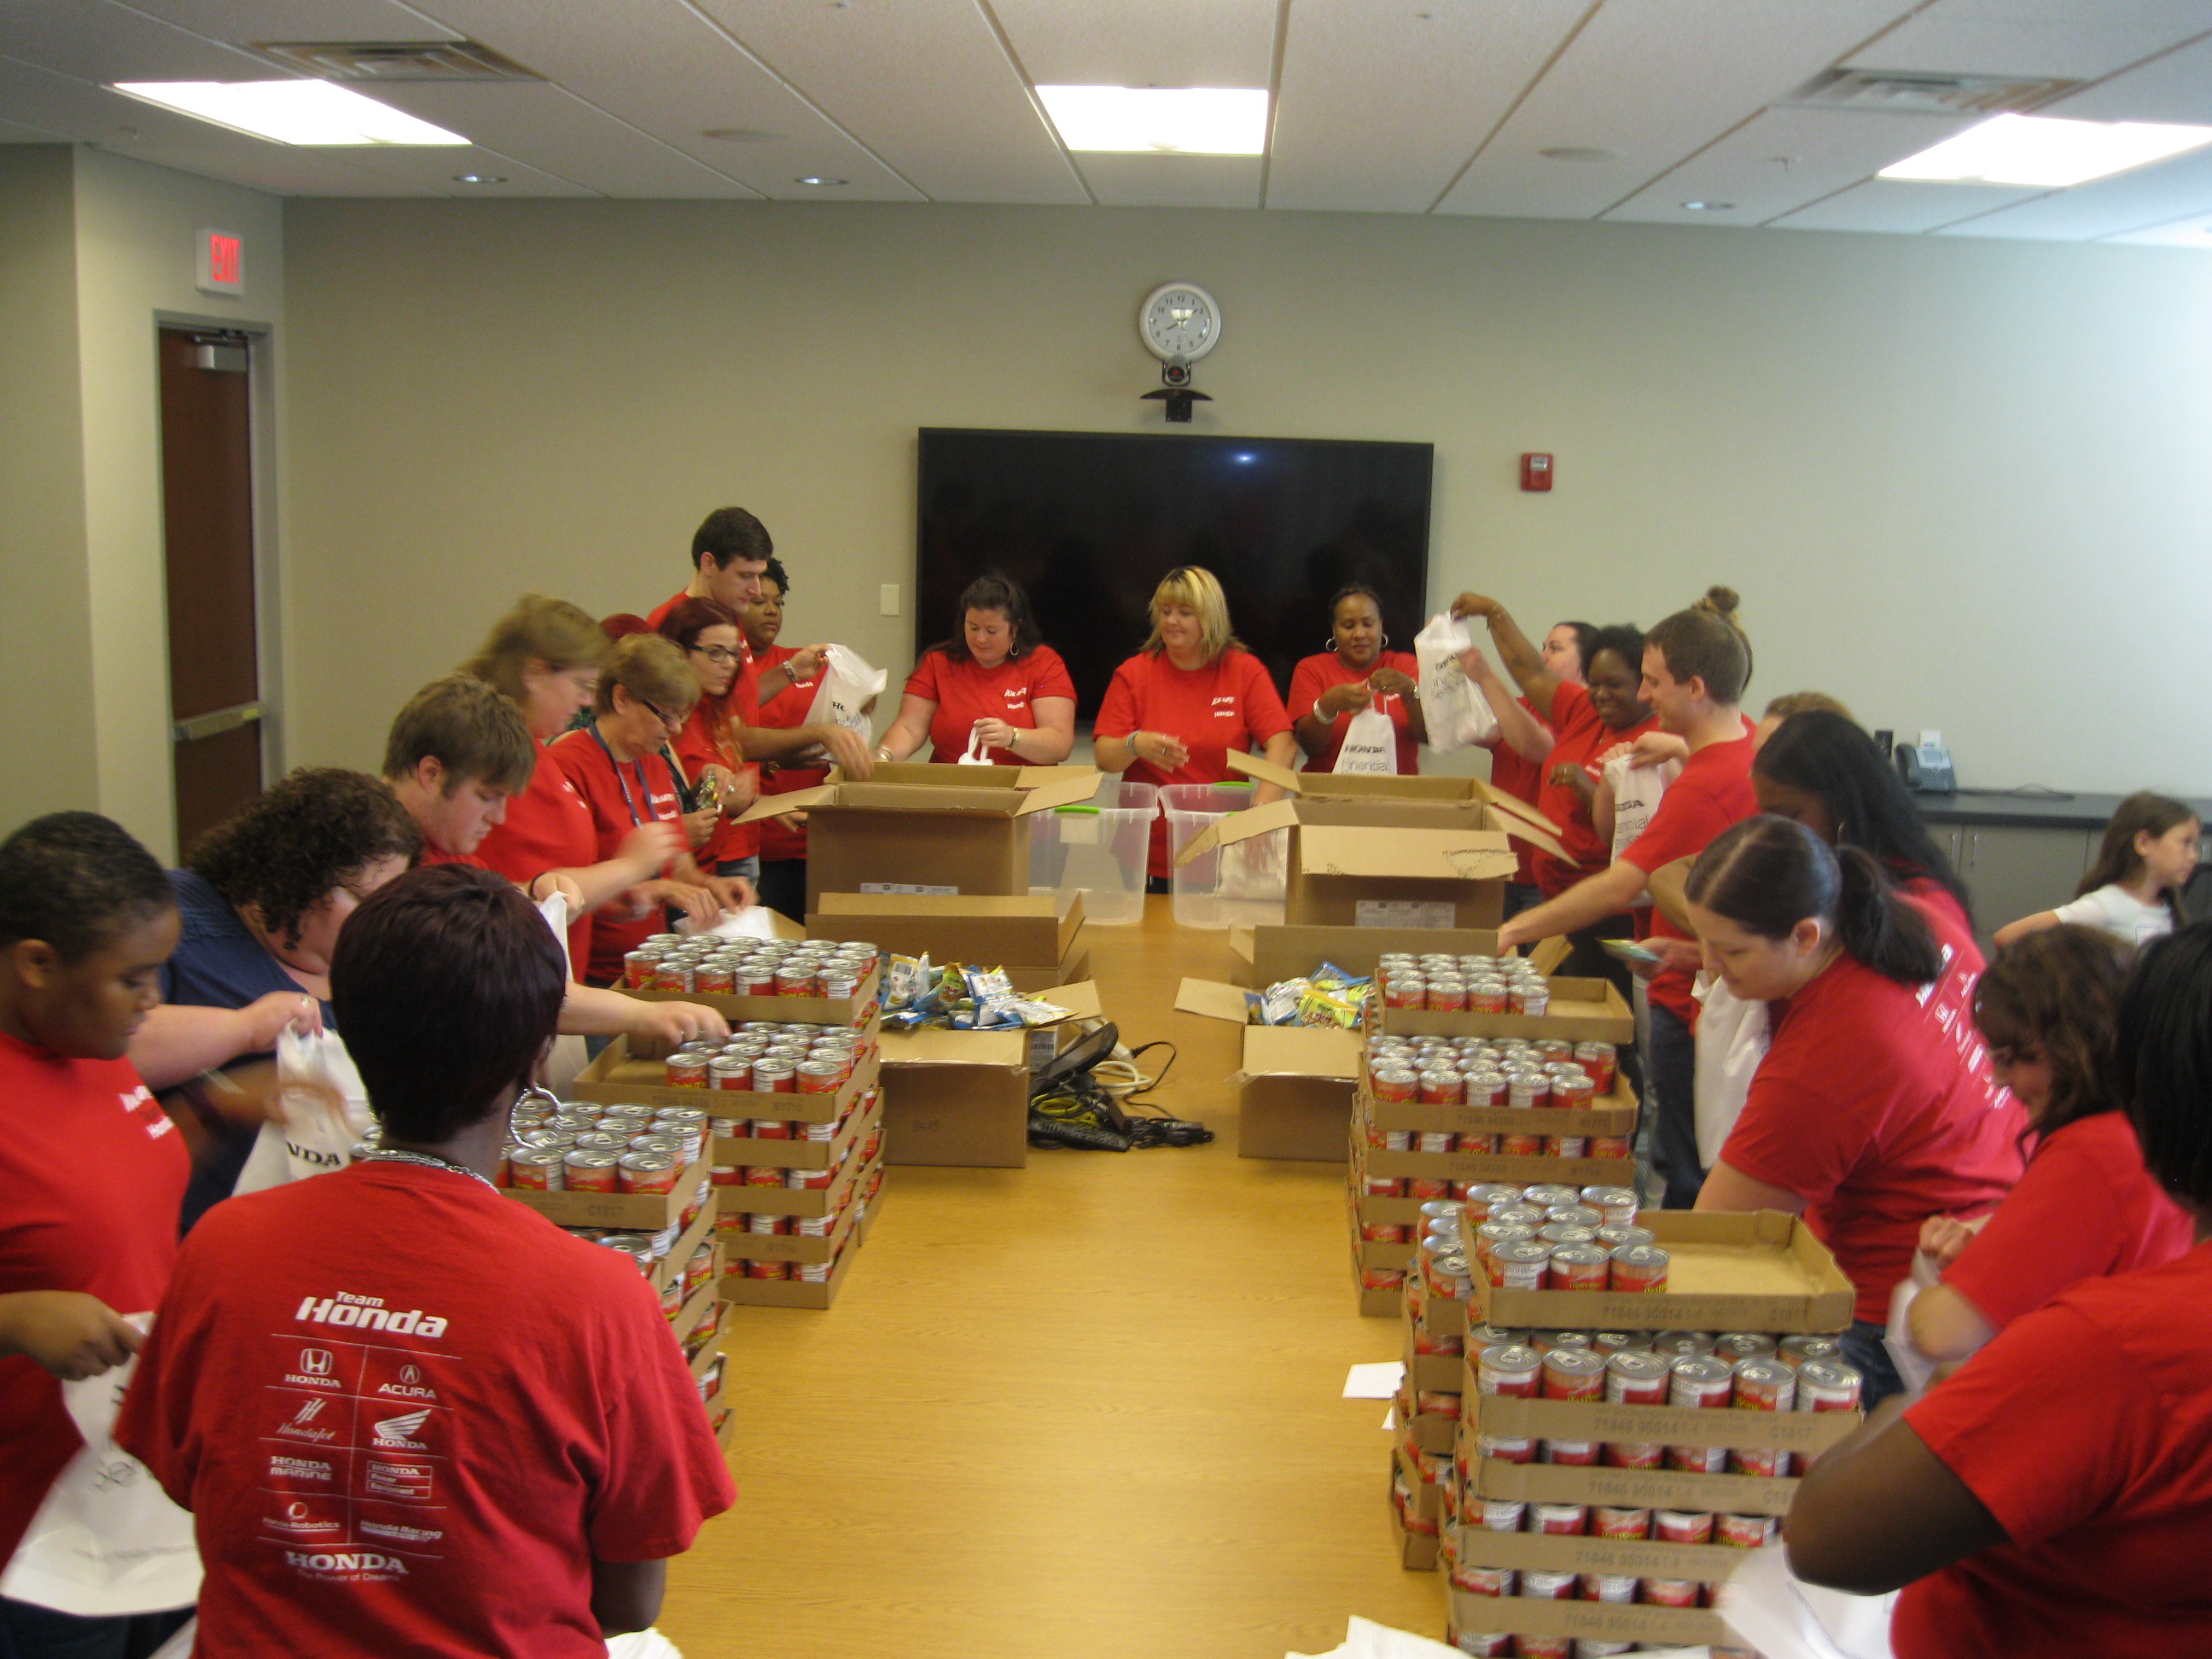 American Honda Finance Corporation Joins BIB to Provide 6,000 Hunger-Free Weekends for Children in the USA